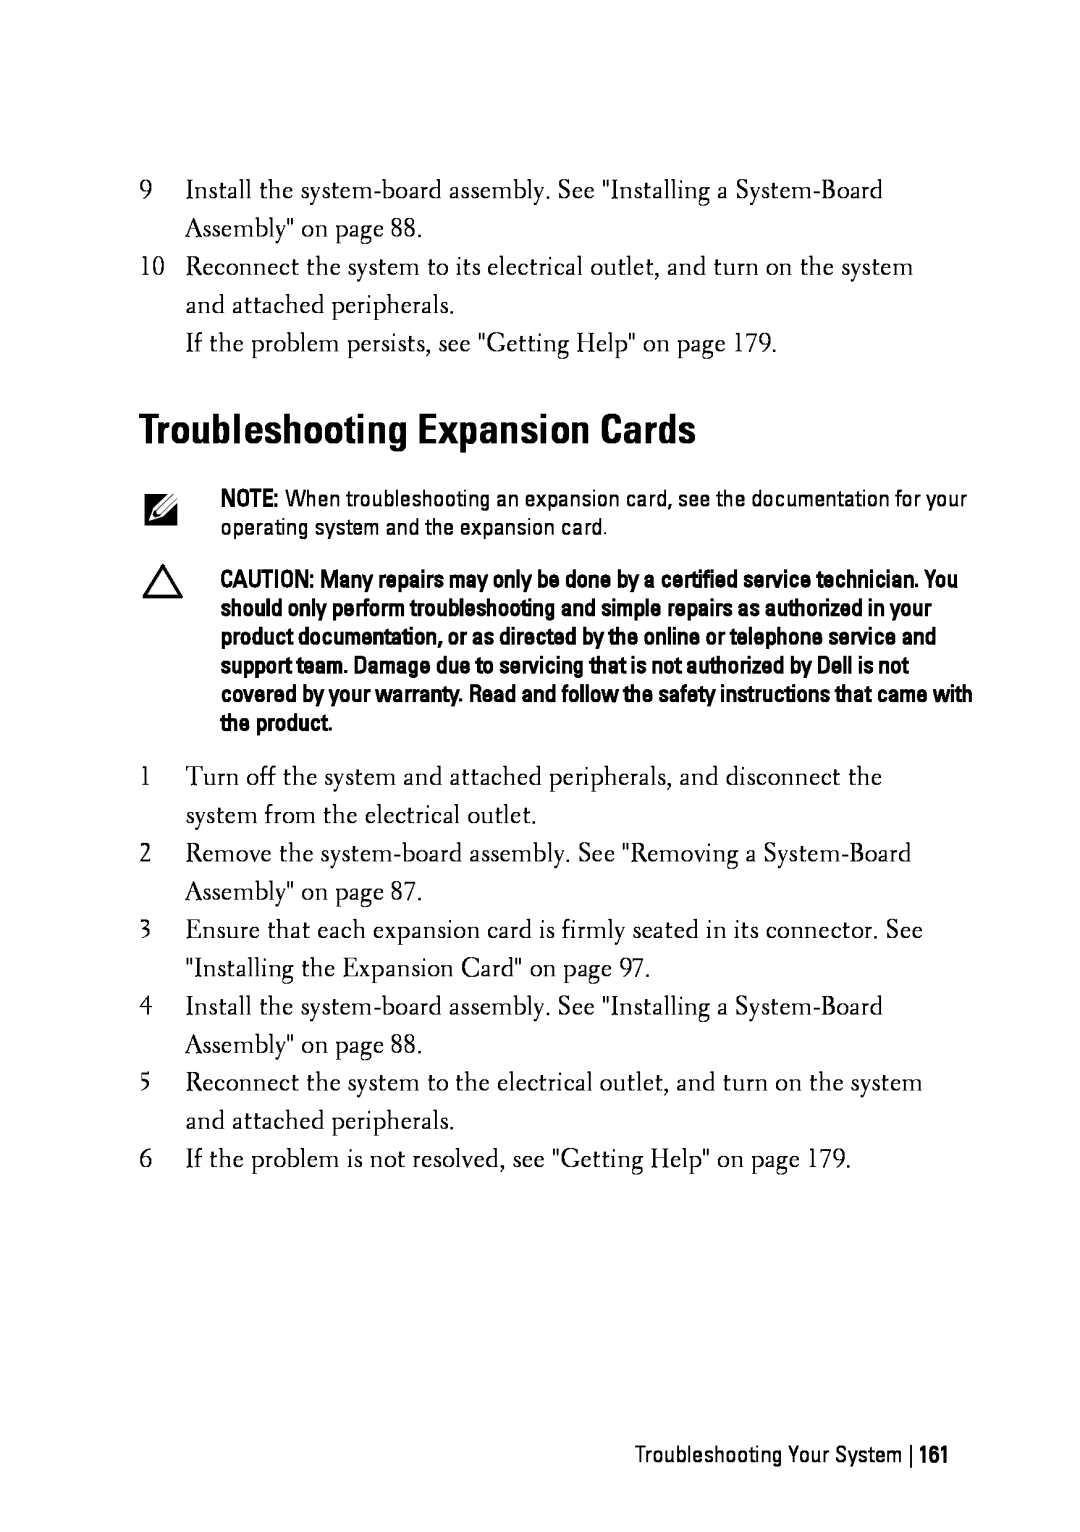 Dell C6145 manual Troubleshooting Expansion Cards 